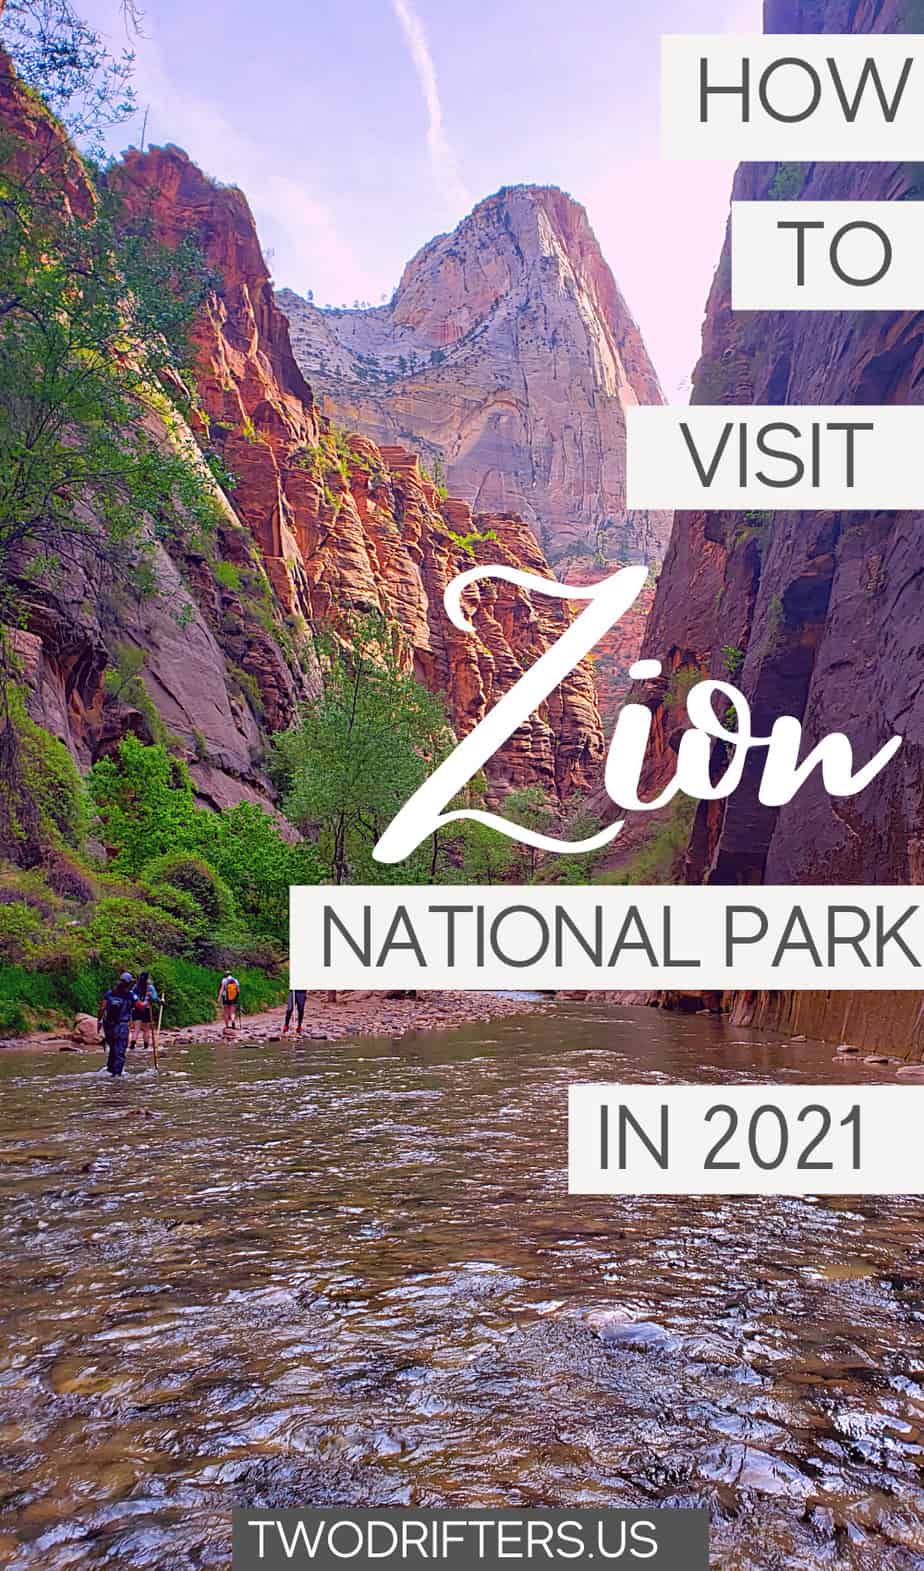 Pinterest social image that says "How to Visit Zion National Park in 2021."